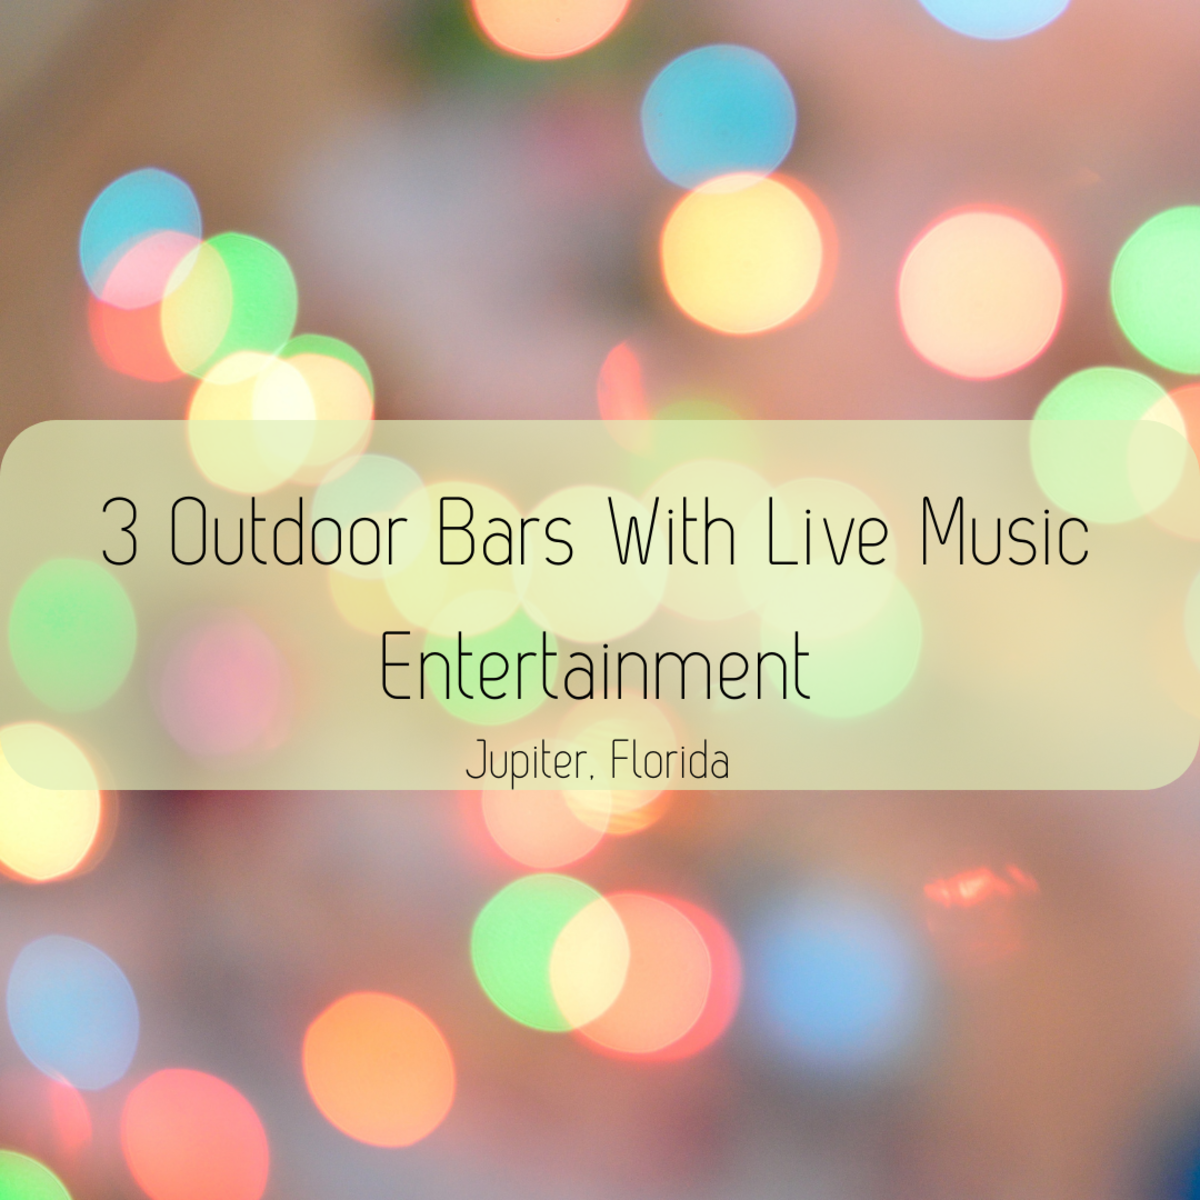 Top 3 Outdoor Bars in Jupiter, Florida With Live Music Entertainment